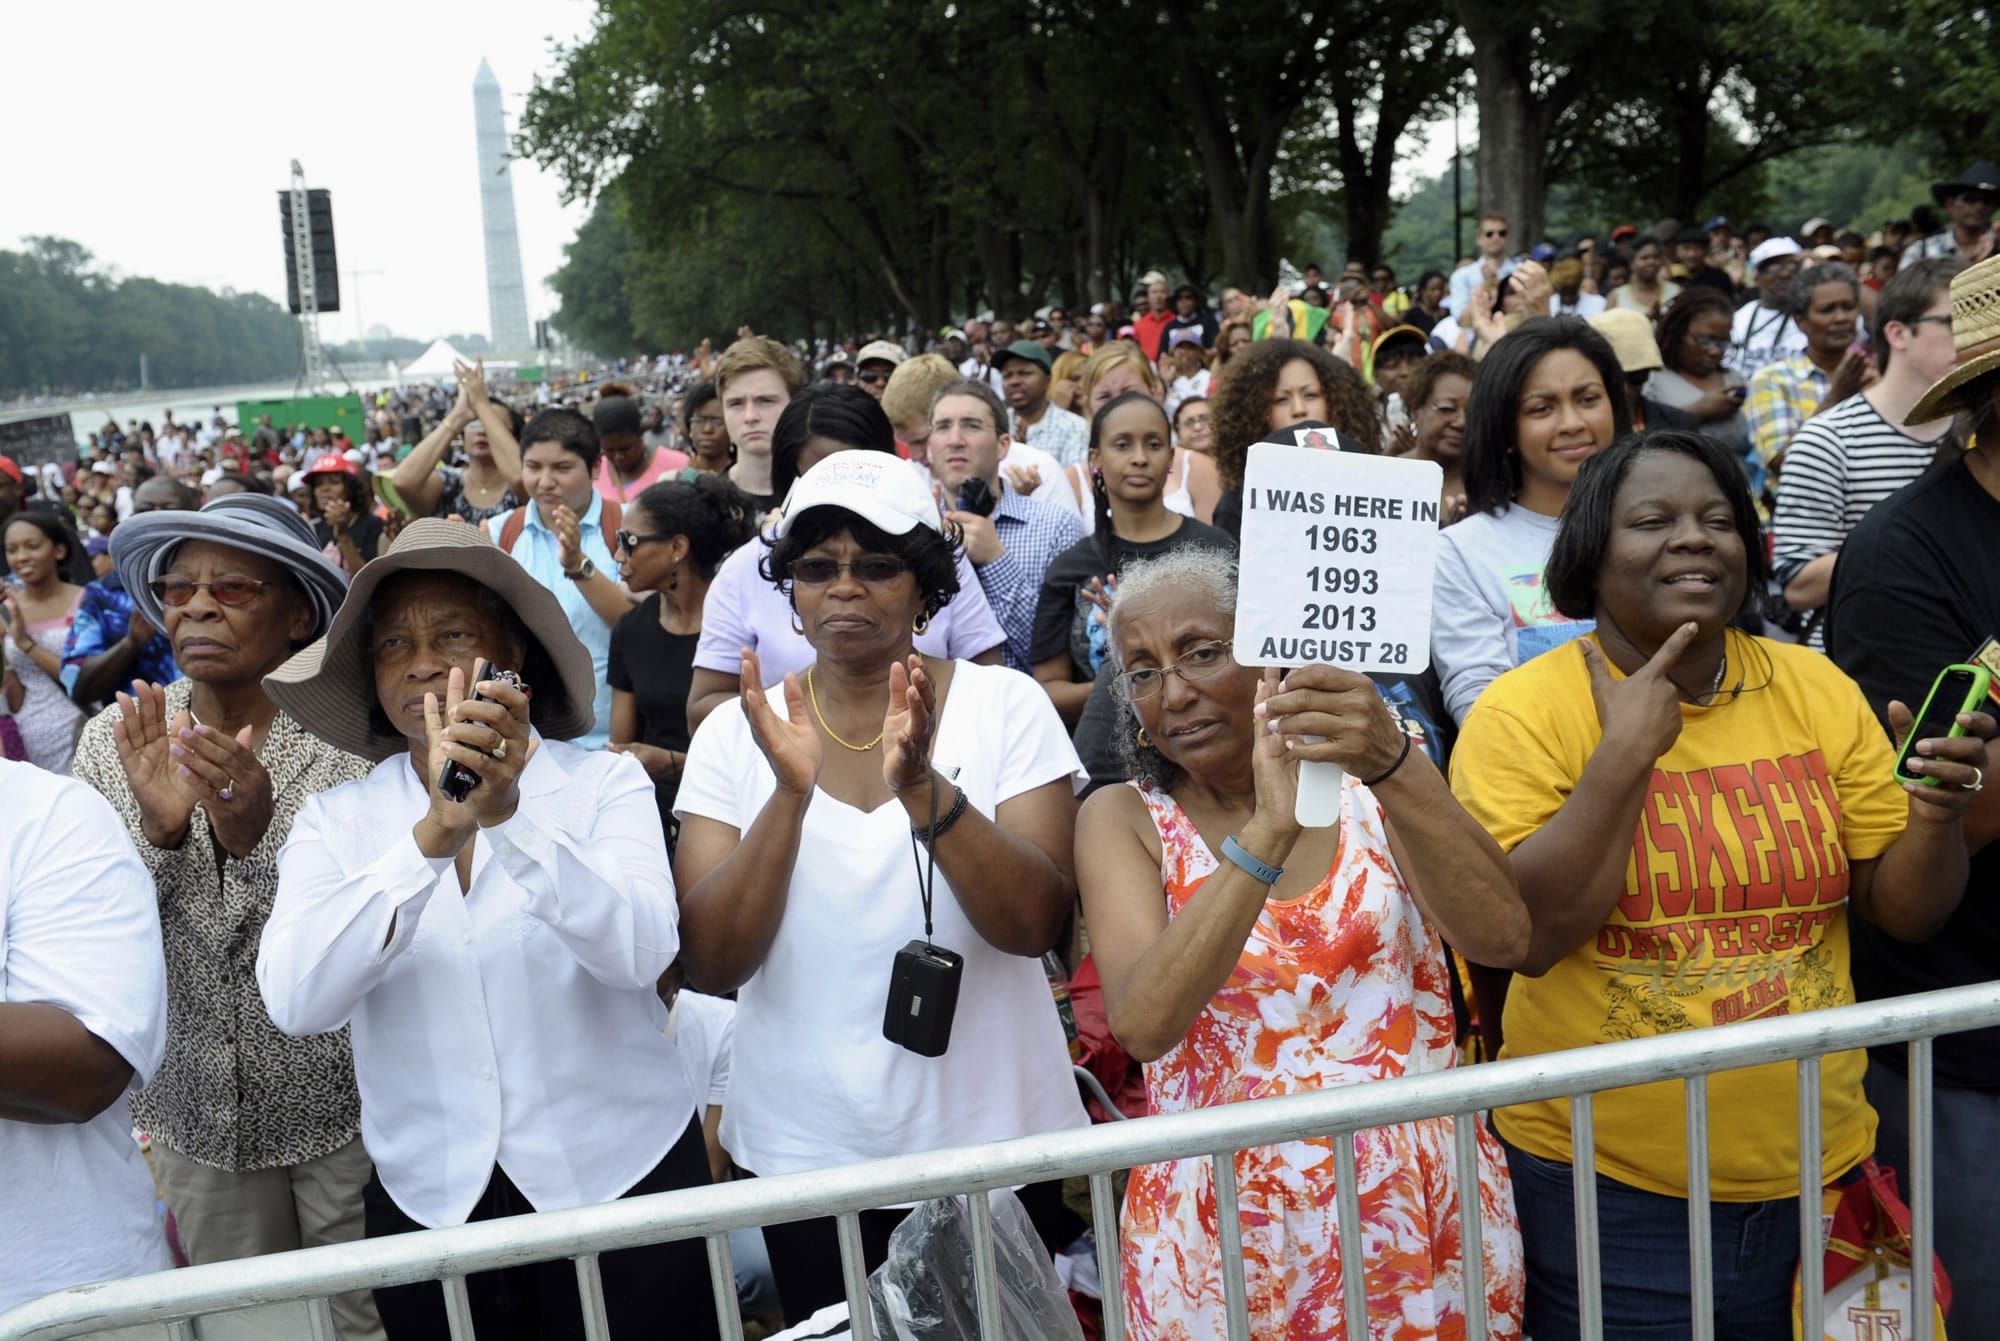 Three women who attended previous marchs on Washington, from left, Armanda Hawkins of Memphis, Vera Moore of Washington, and Betty Waller Gray of Richmond, Va., (holding sign) listen to the speakers during the march on Washington on Wednesday at the Lincoln Memorial in Washington.